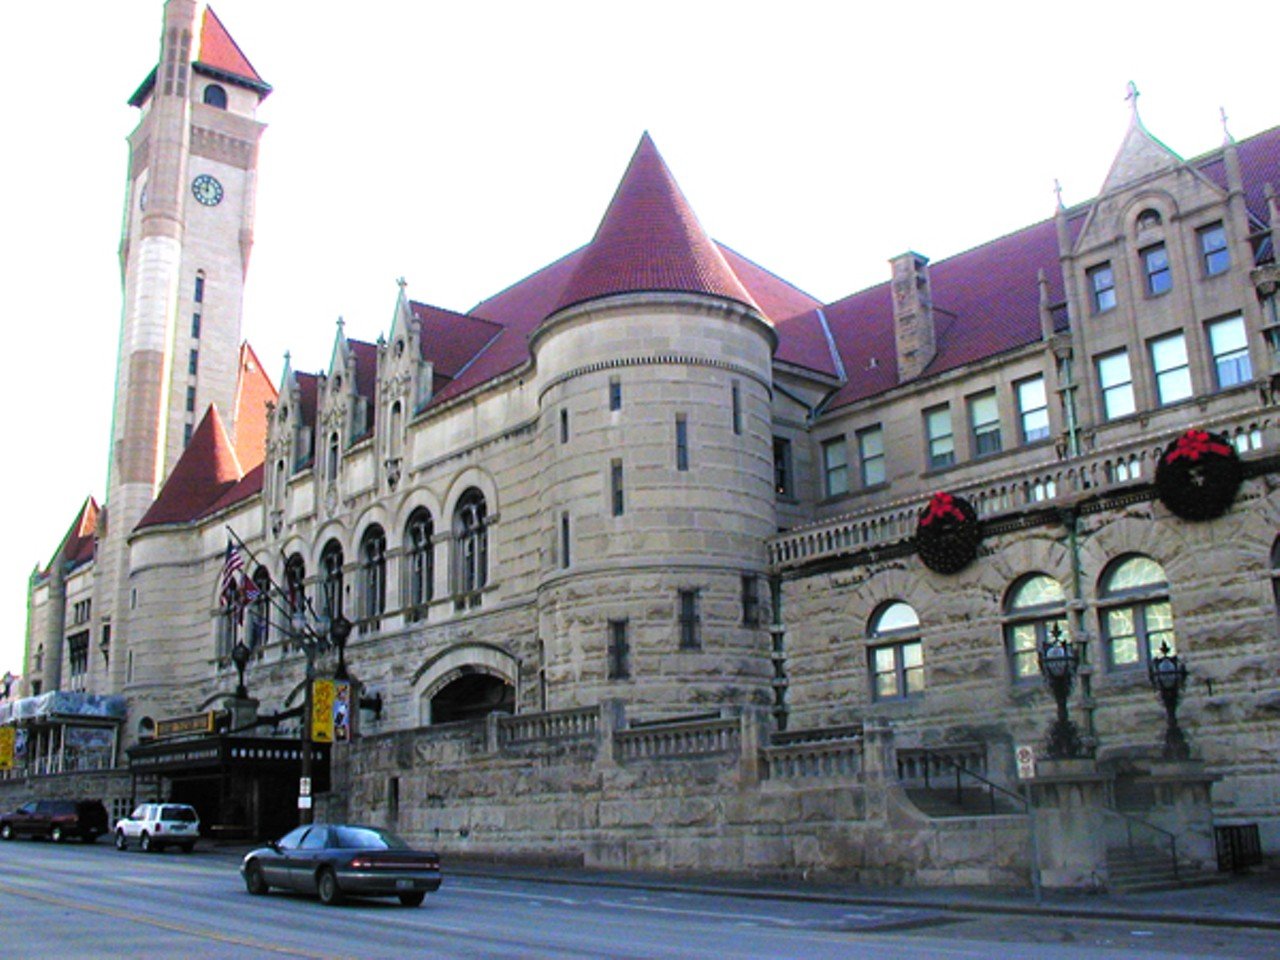 Oppenheimer Properties bought Union Station for $5.5 million in March of the following year.